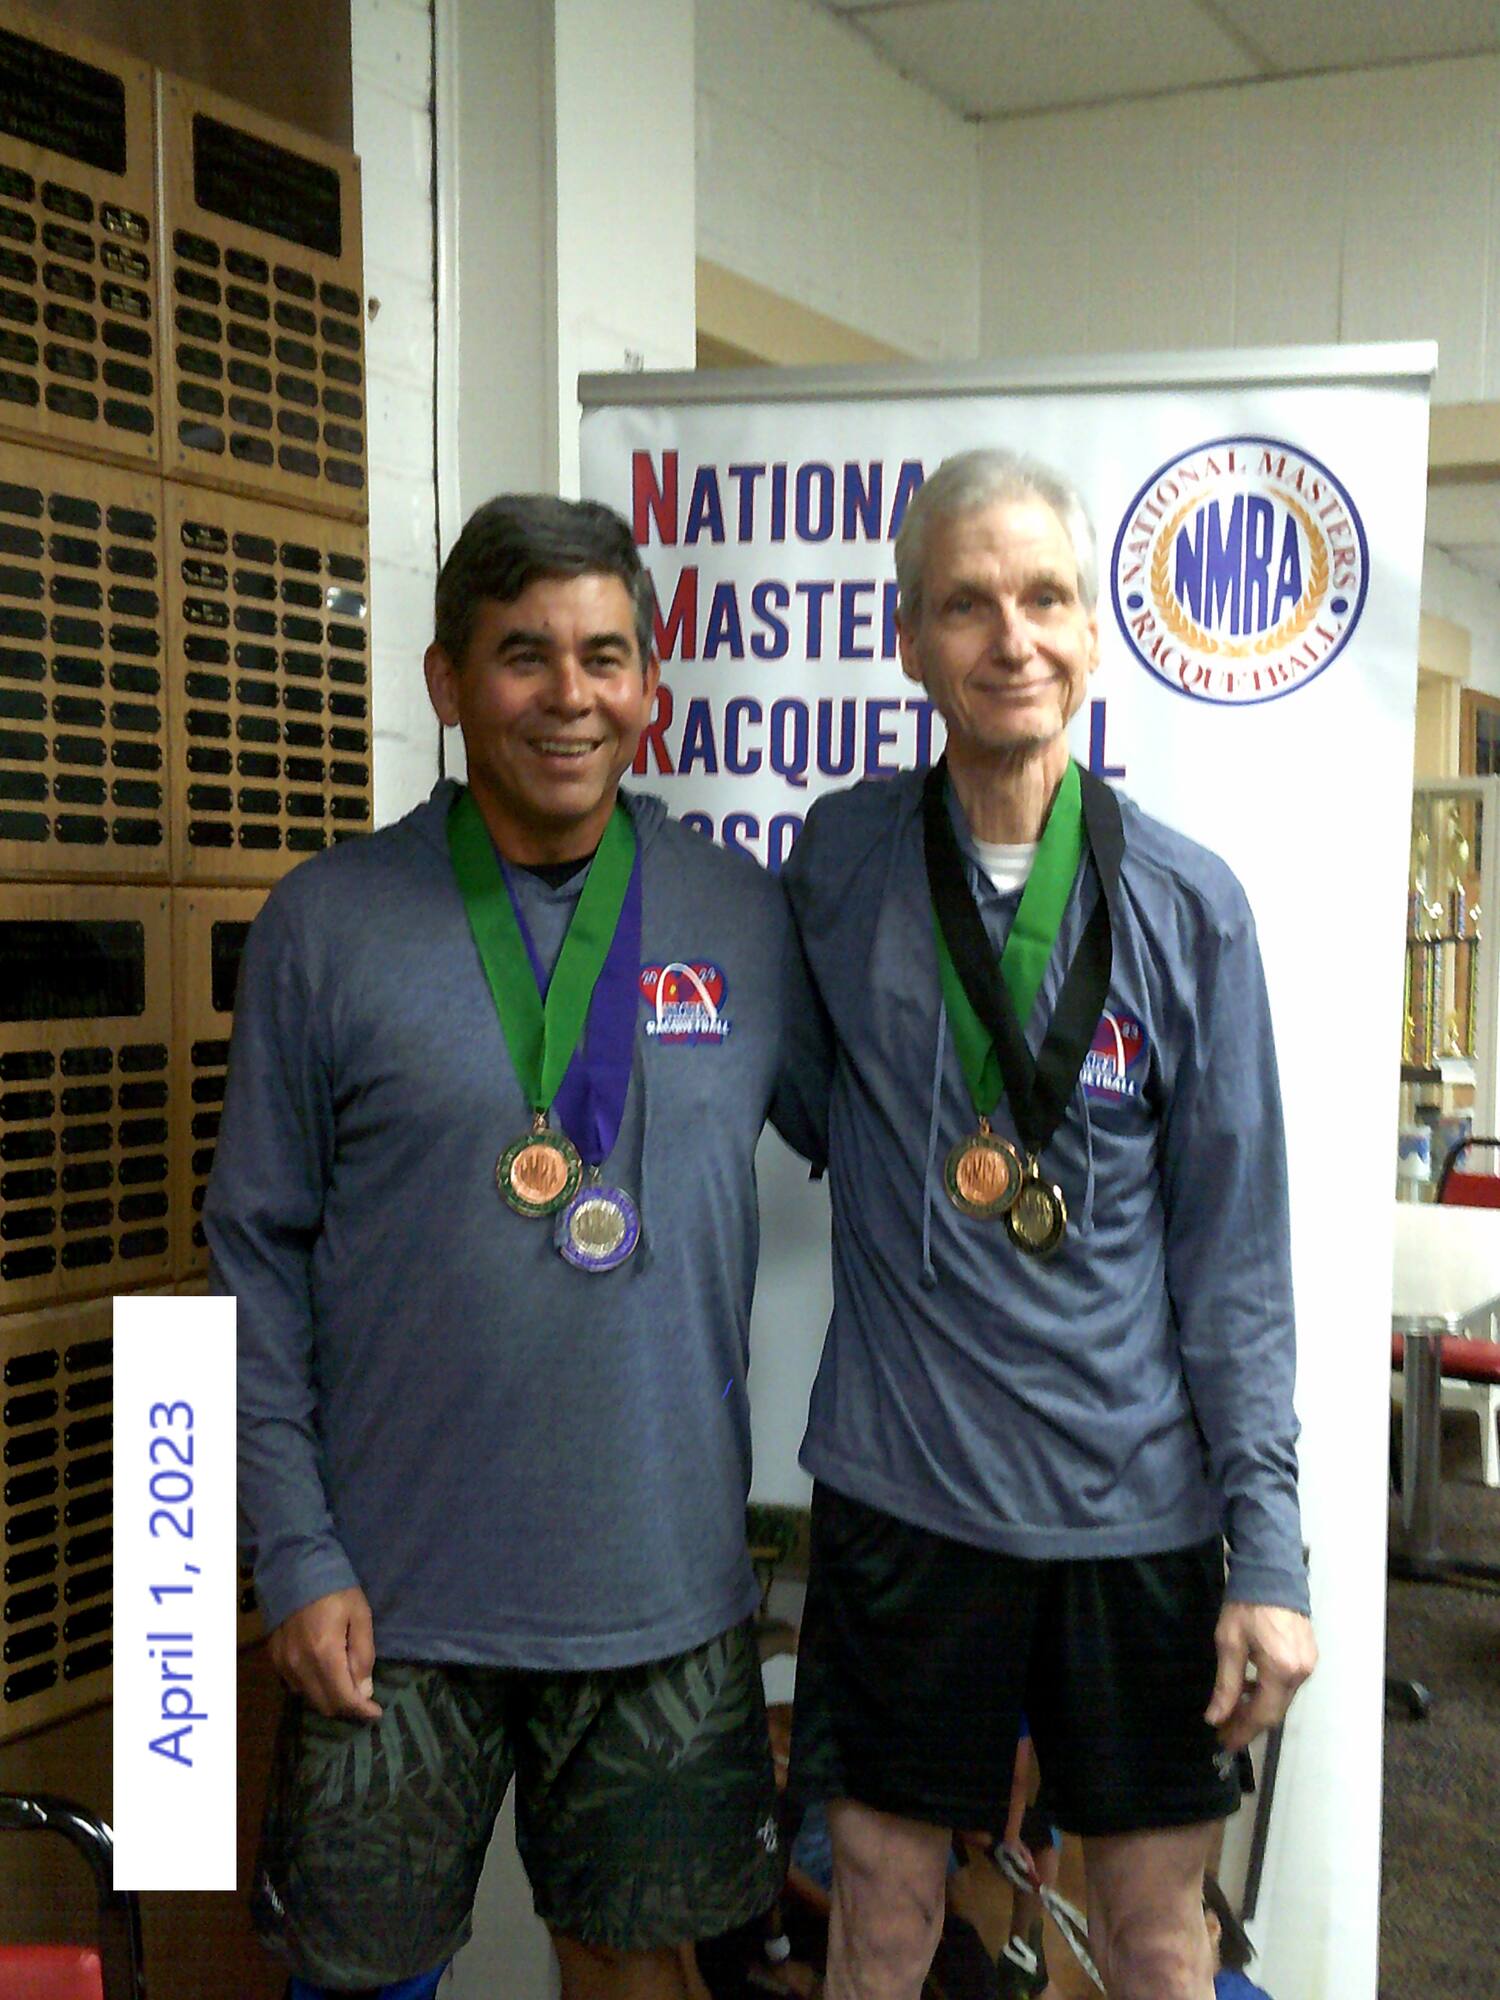 John Winigns and Rick Ferring - Men's 55 Doubles at the NMRA Event in St. Louis, MO